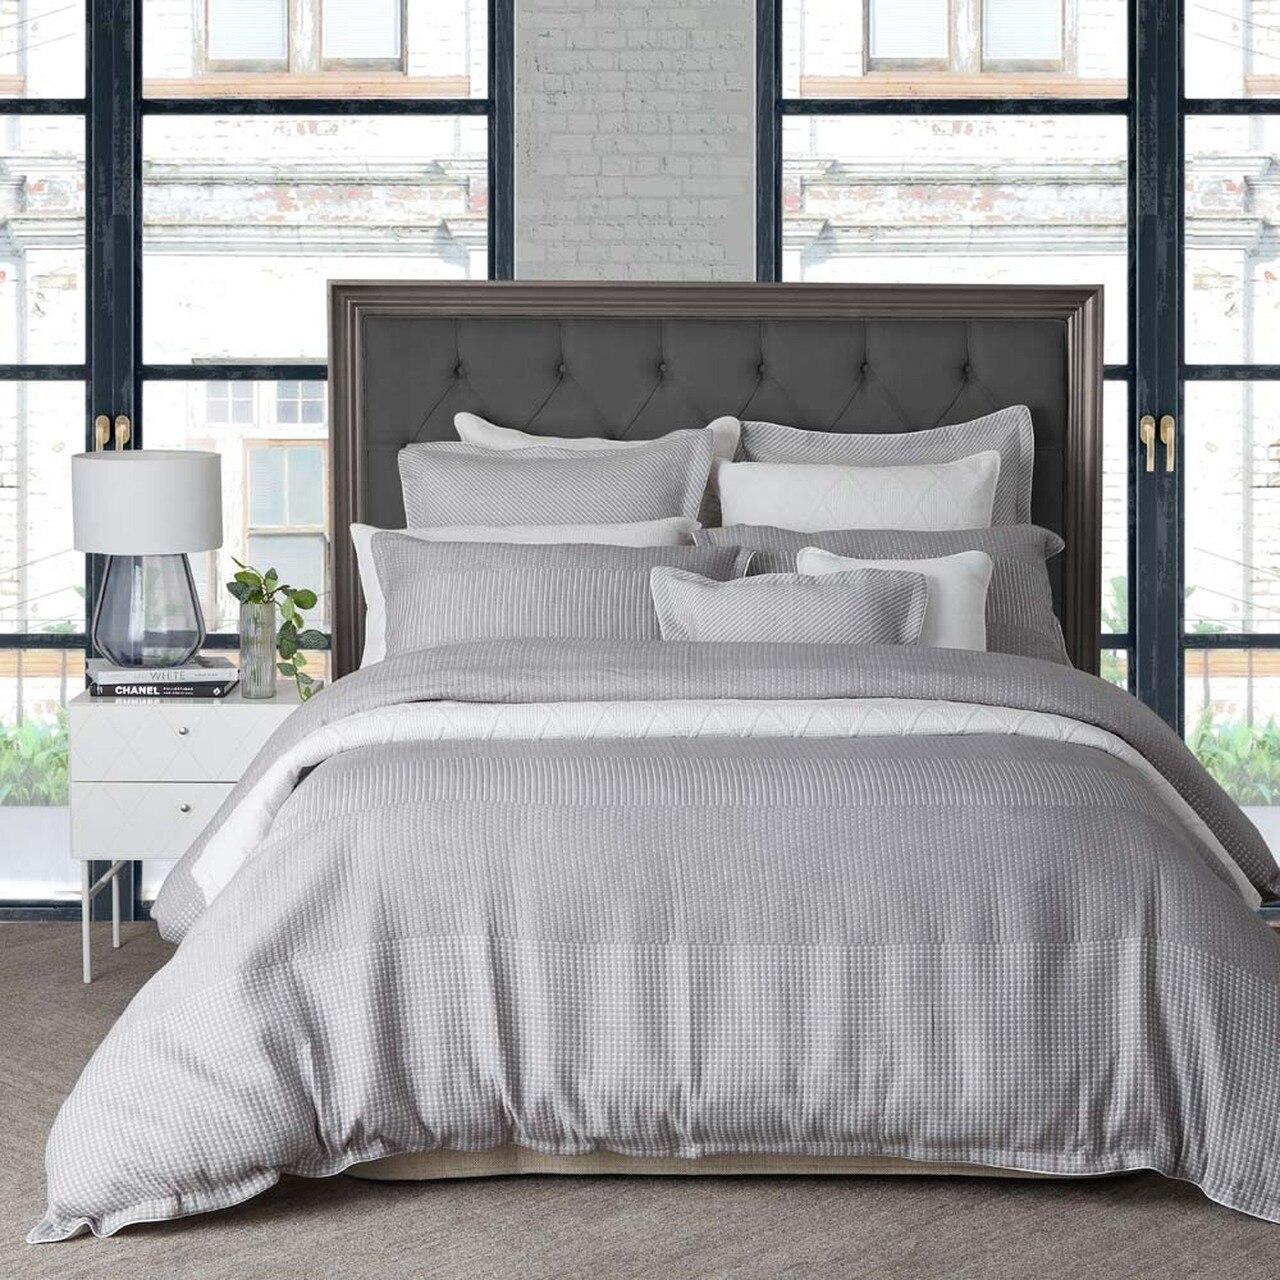 Private collection Tier Silver Duvet Doona Quilt Cover Set - Queen Size